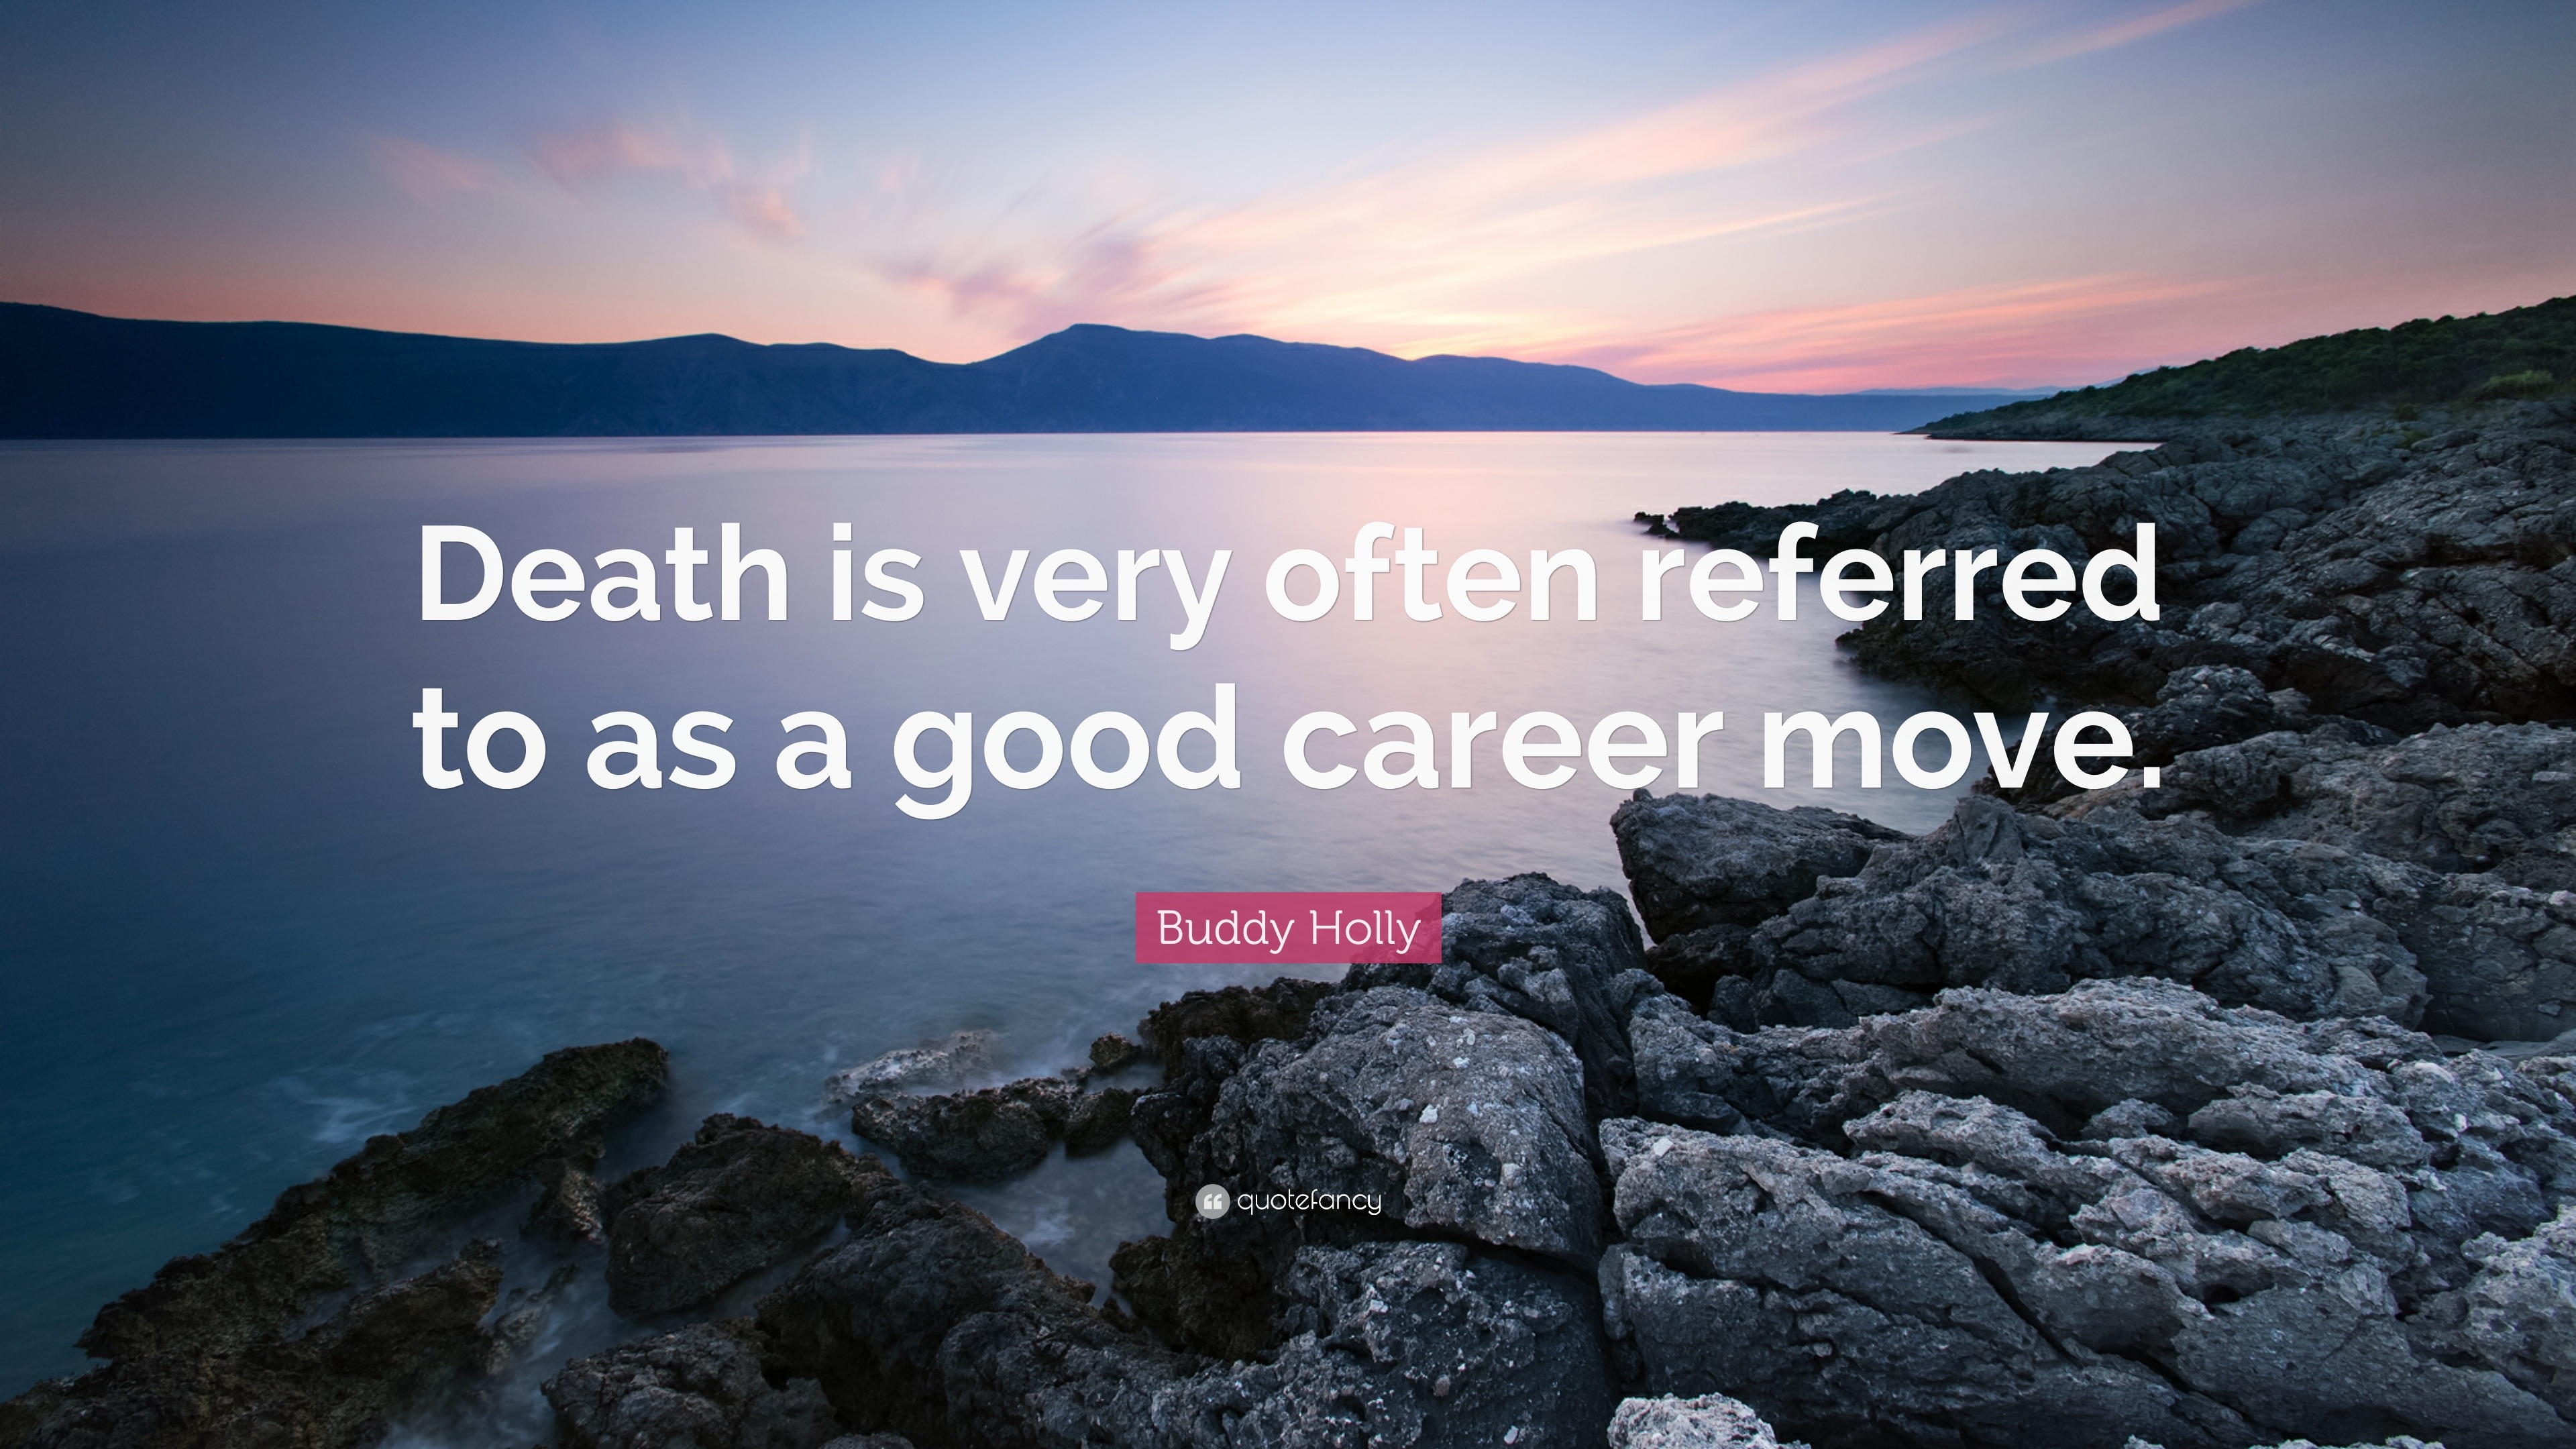 Buddy Holly Quote: "Death is very often referred to as a good career move." (7 wallpapers ...